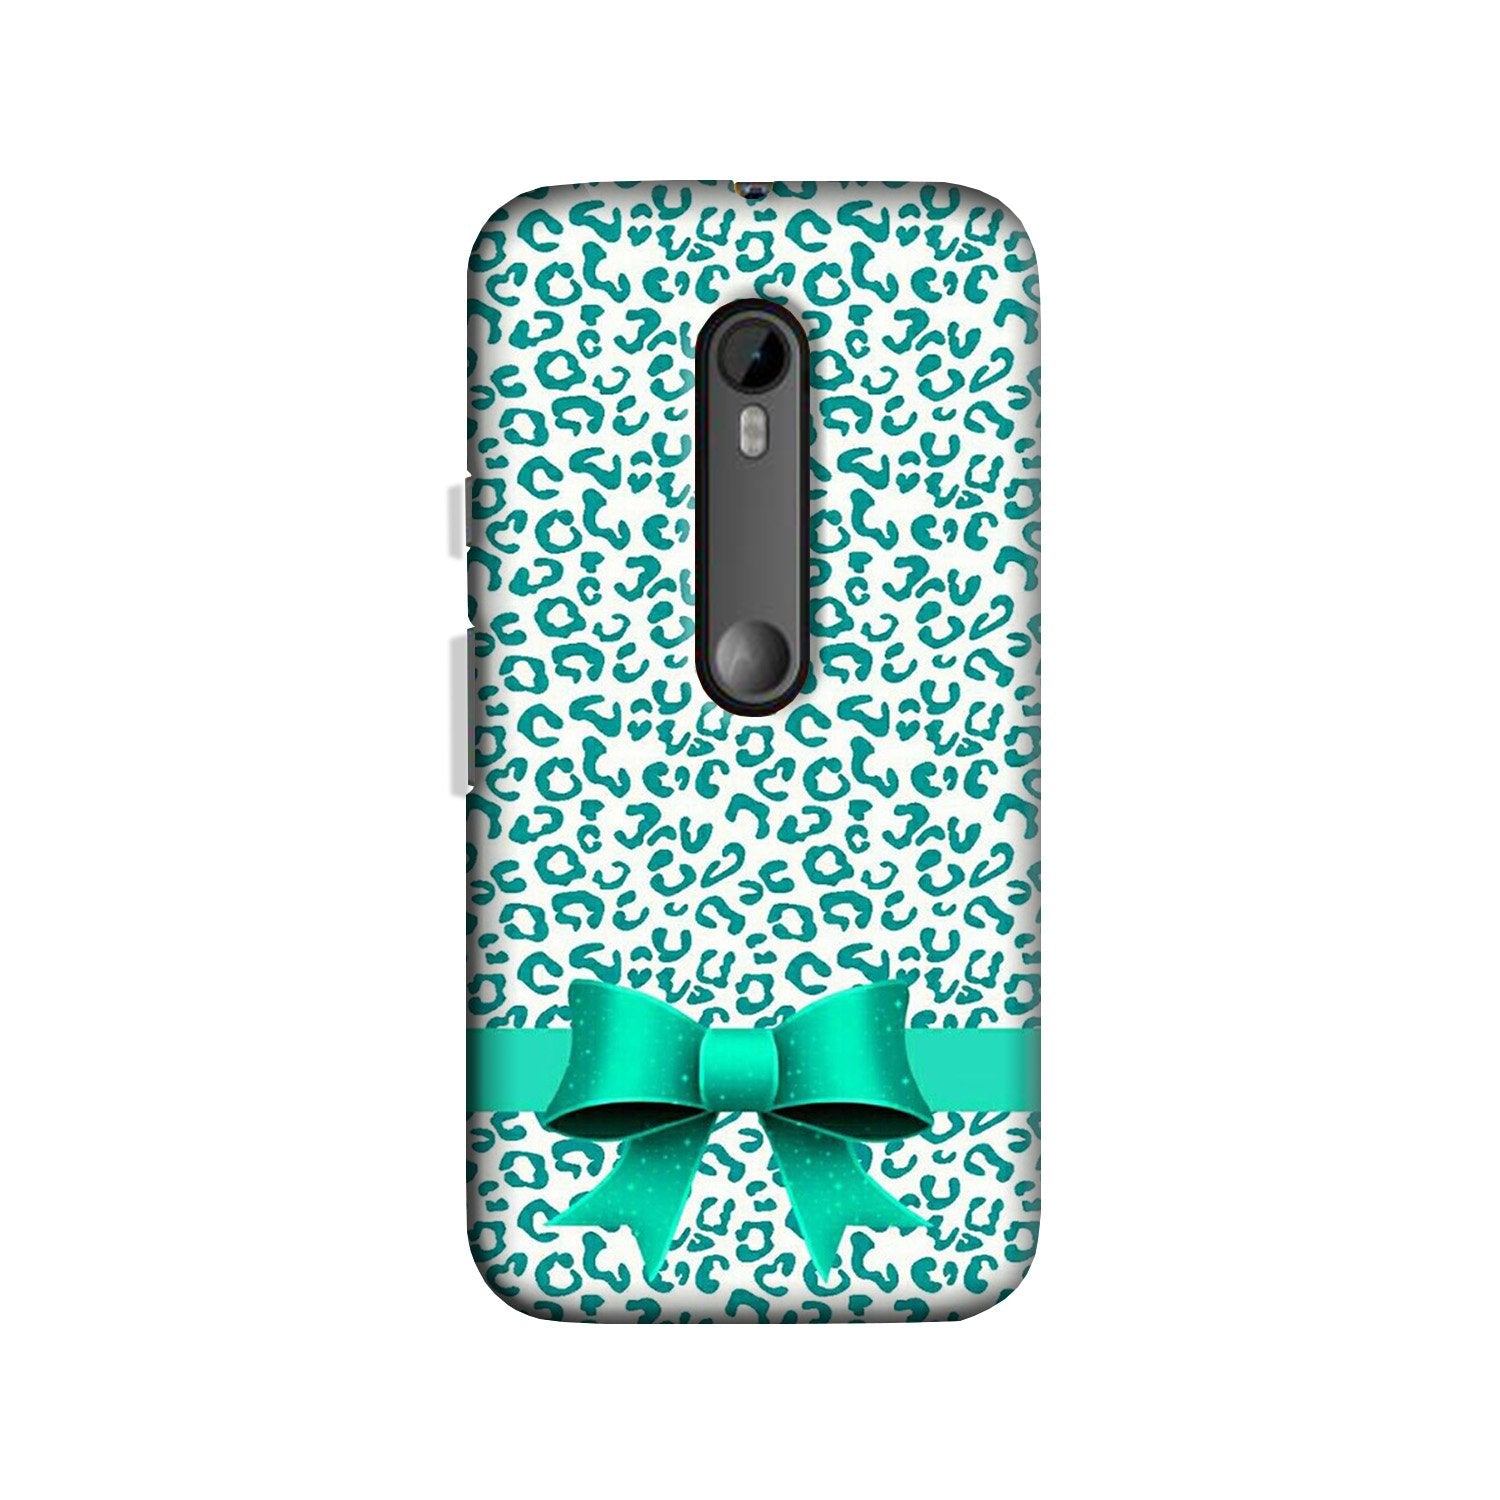 Gift Wrap6 Case for Moto X Play